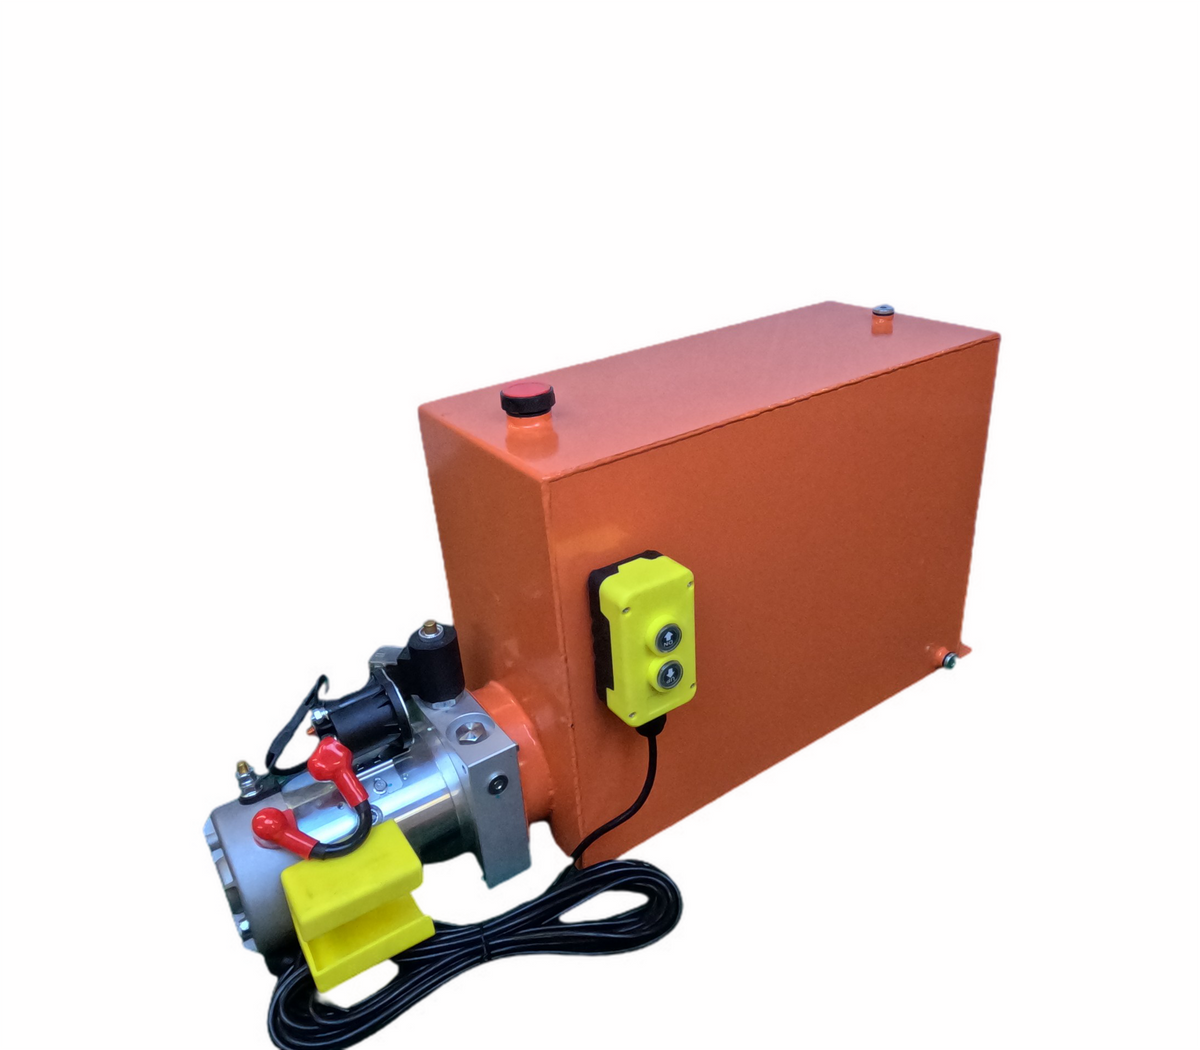 12vdc High Flow Hydraulic Power unit with orange 28qt tank for telescopic dump bed kit. 